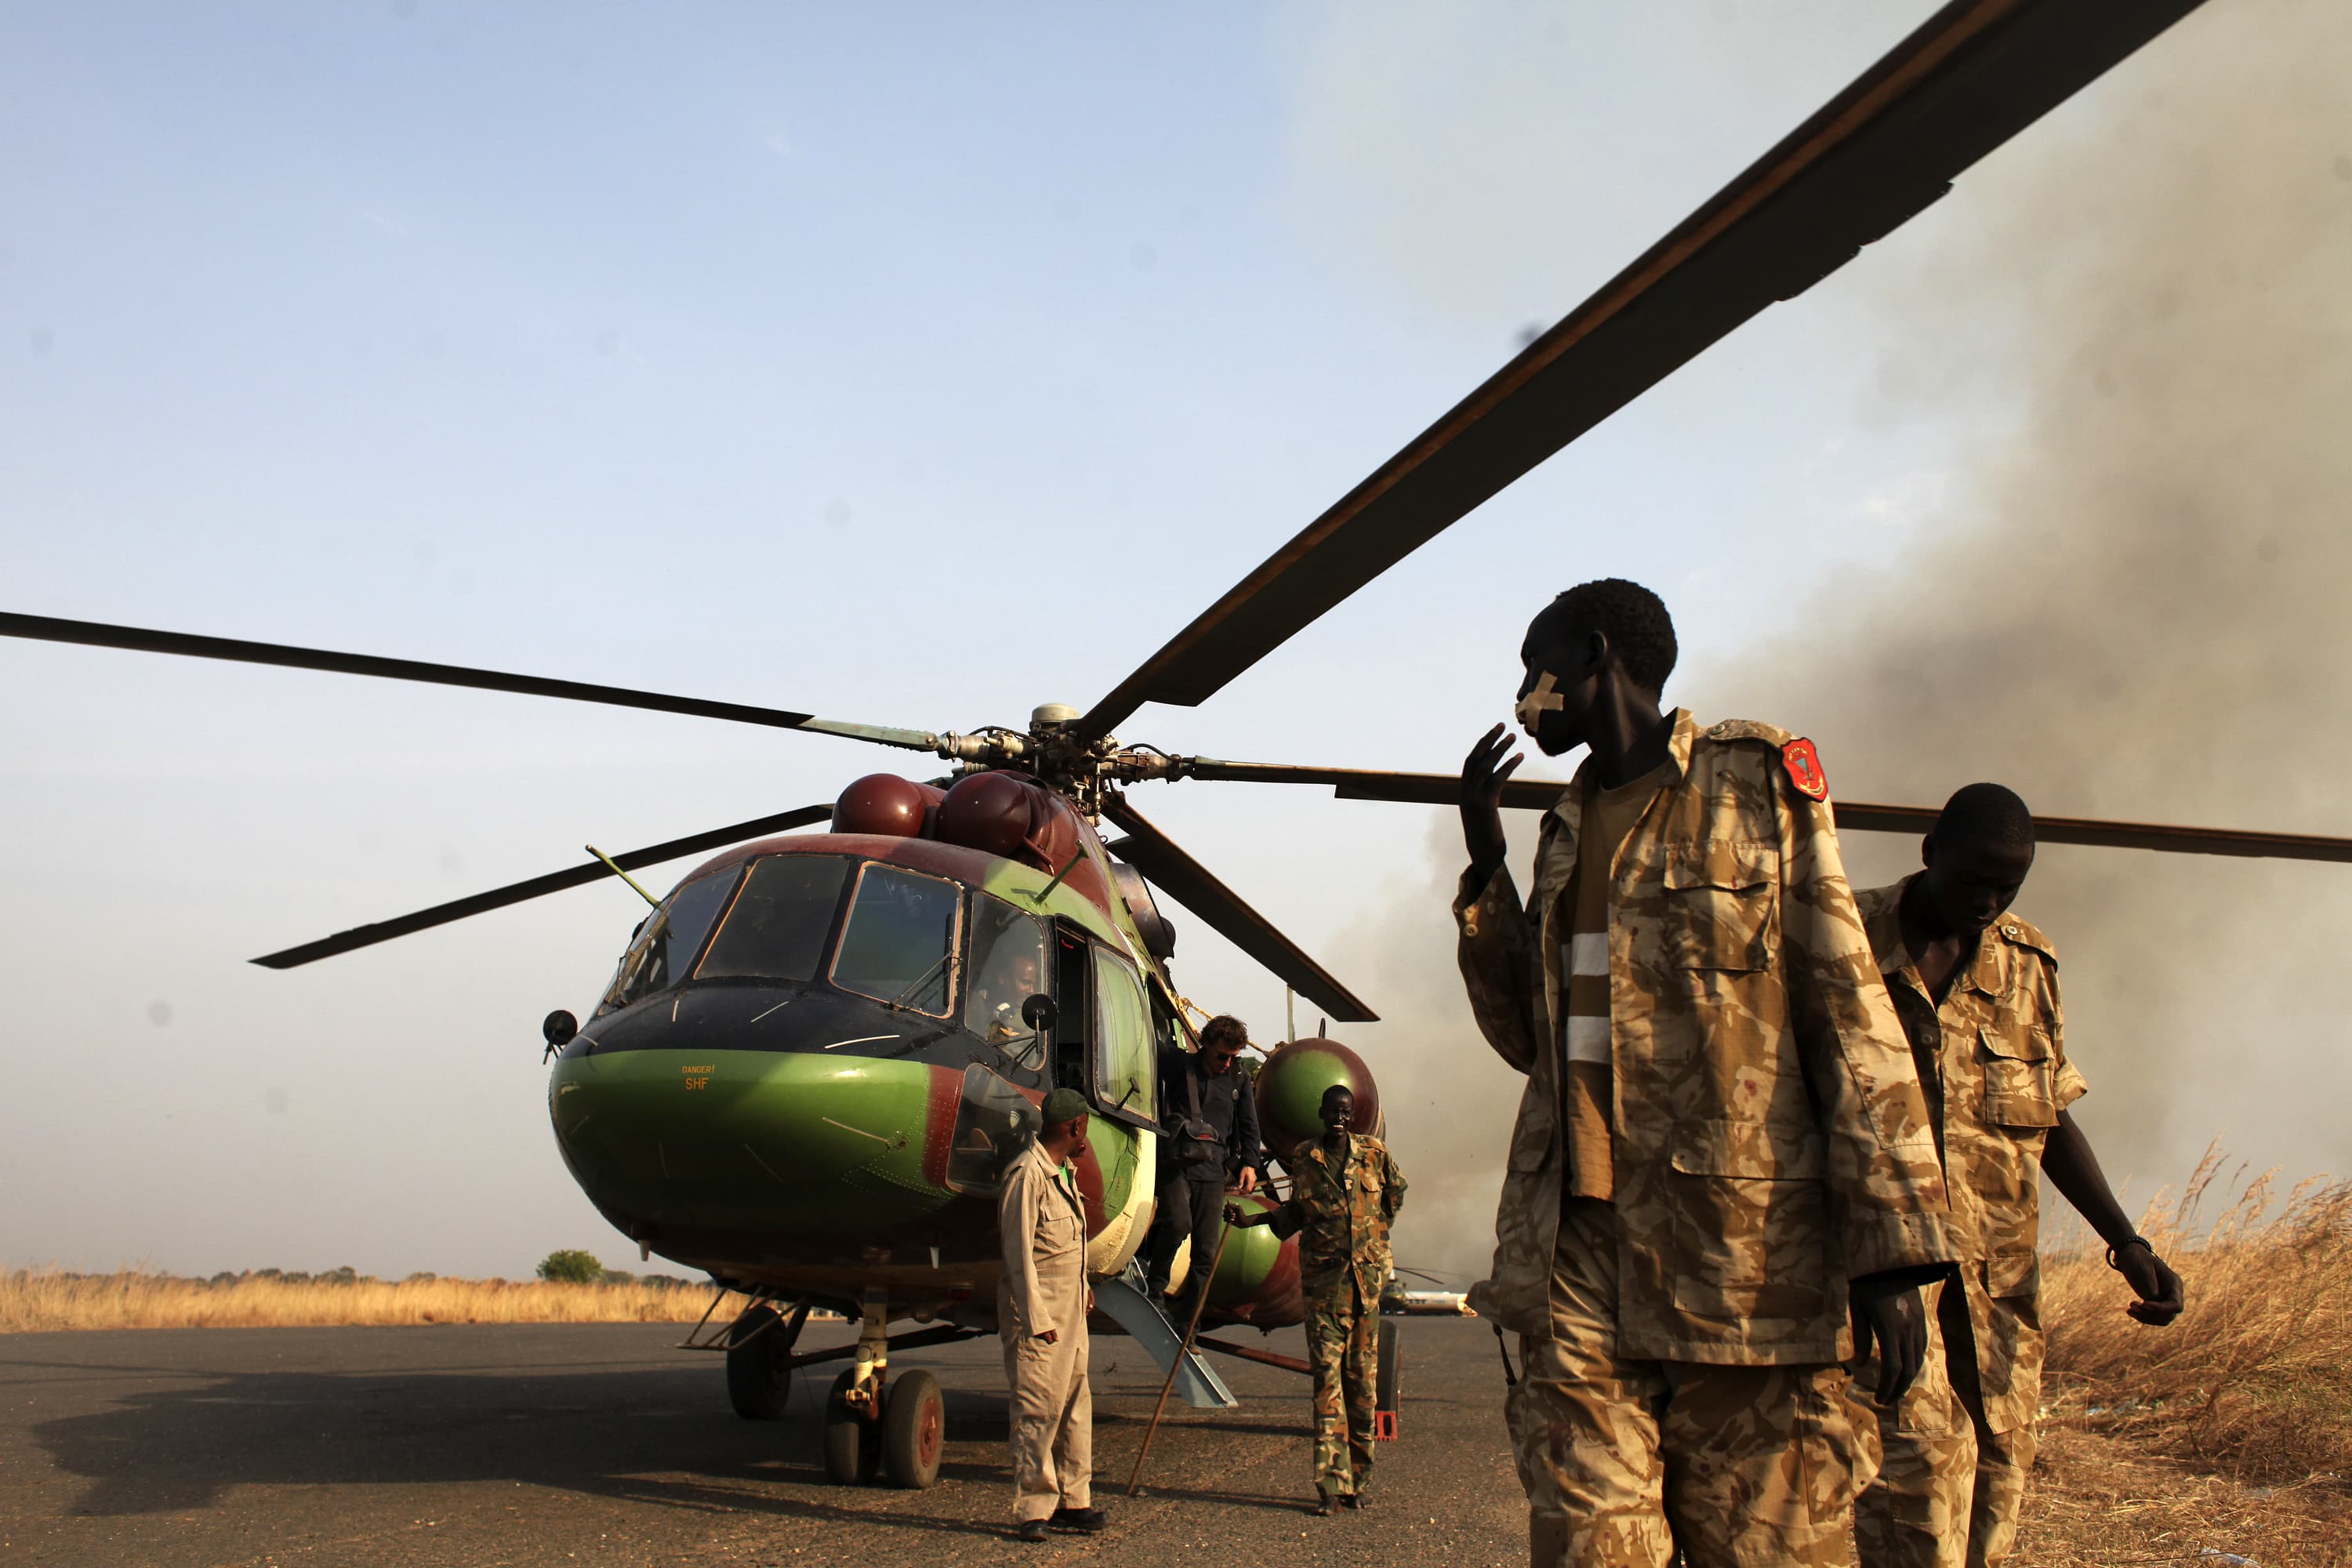 SPLA soldiers and a journalist leave a helicopter after a flight to Bor, in Juba, South Sudan January 25, 2014, REUTERS/Andreea Campeanu